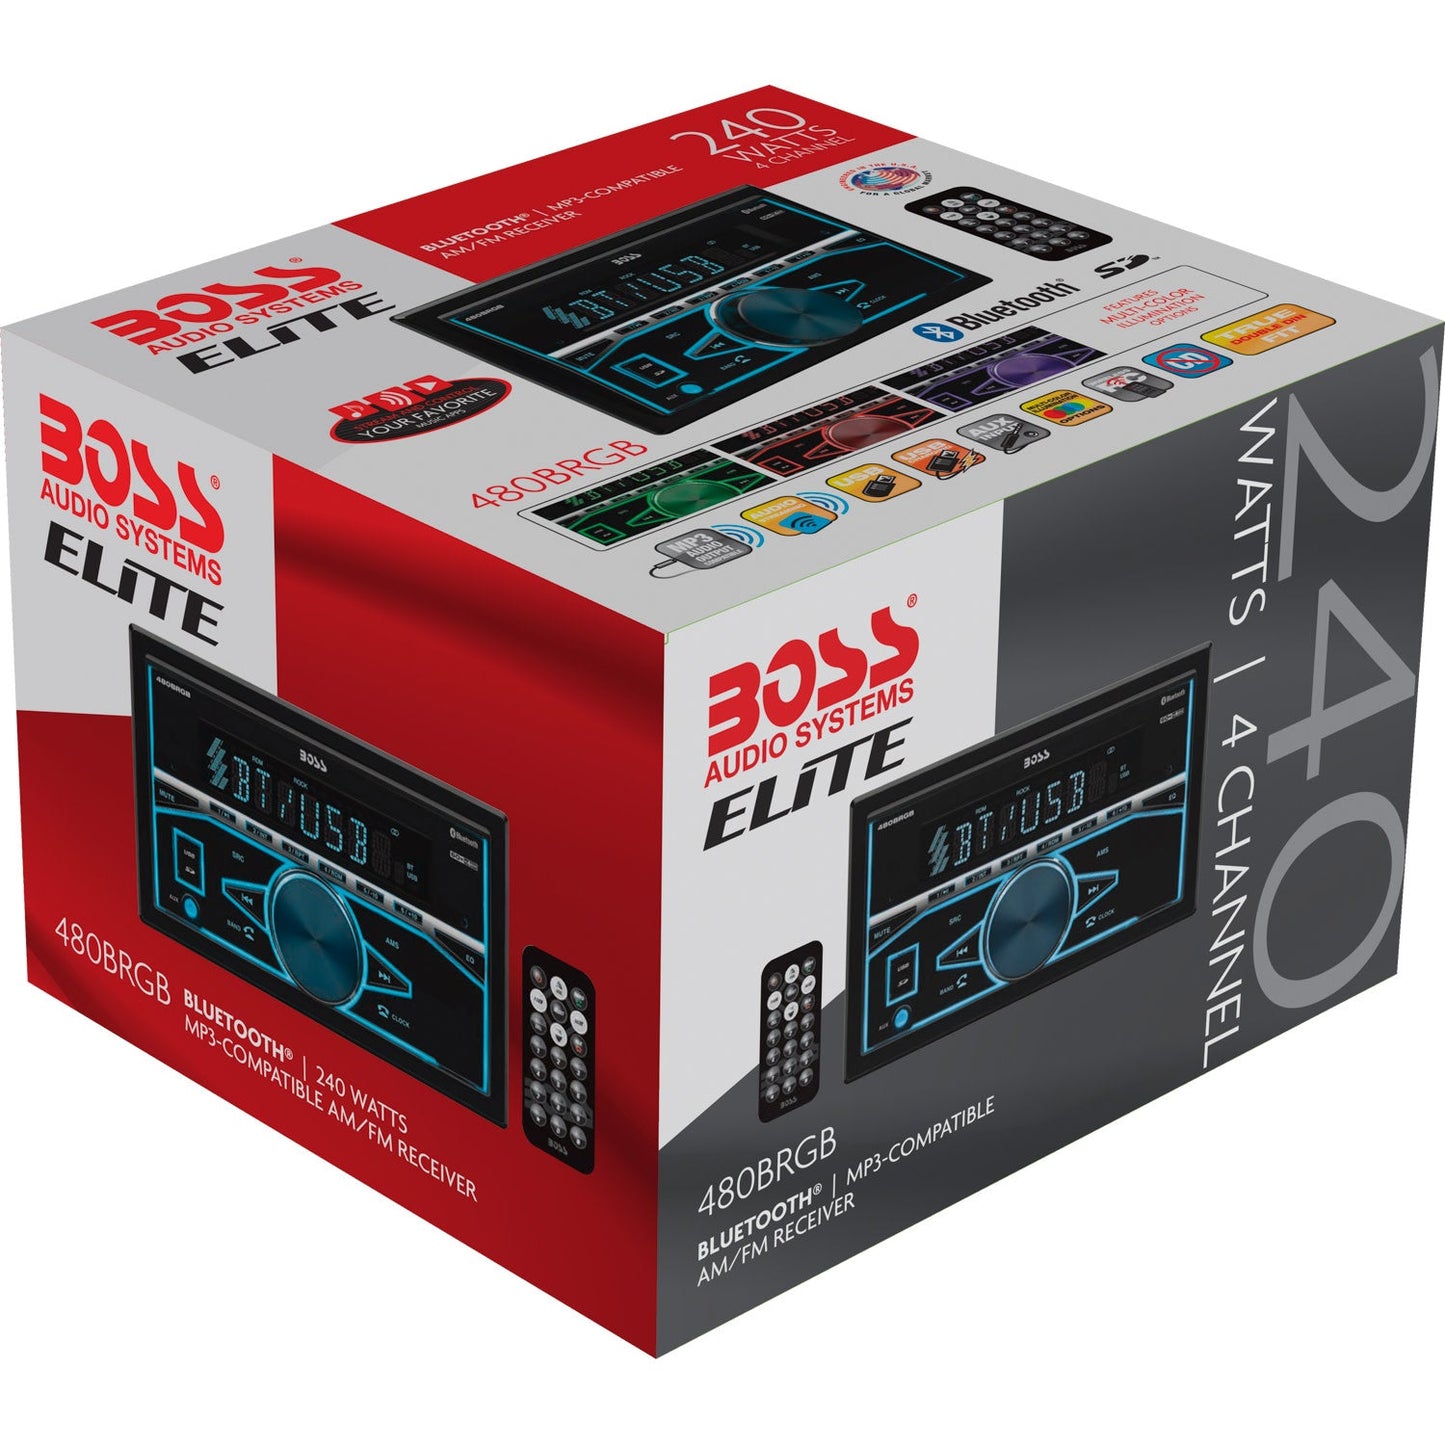 BOSS Audio Systems, In-Dash > Double Din, Model 480BRGB, retail packaging view